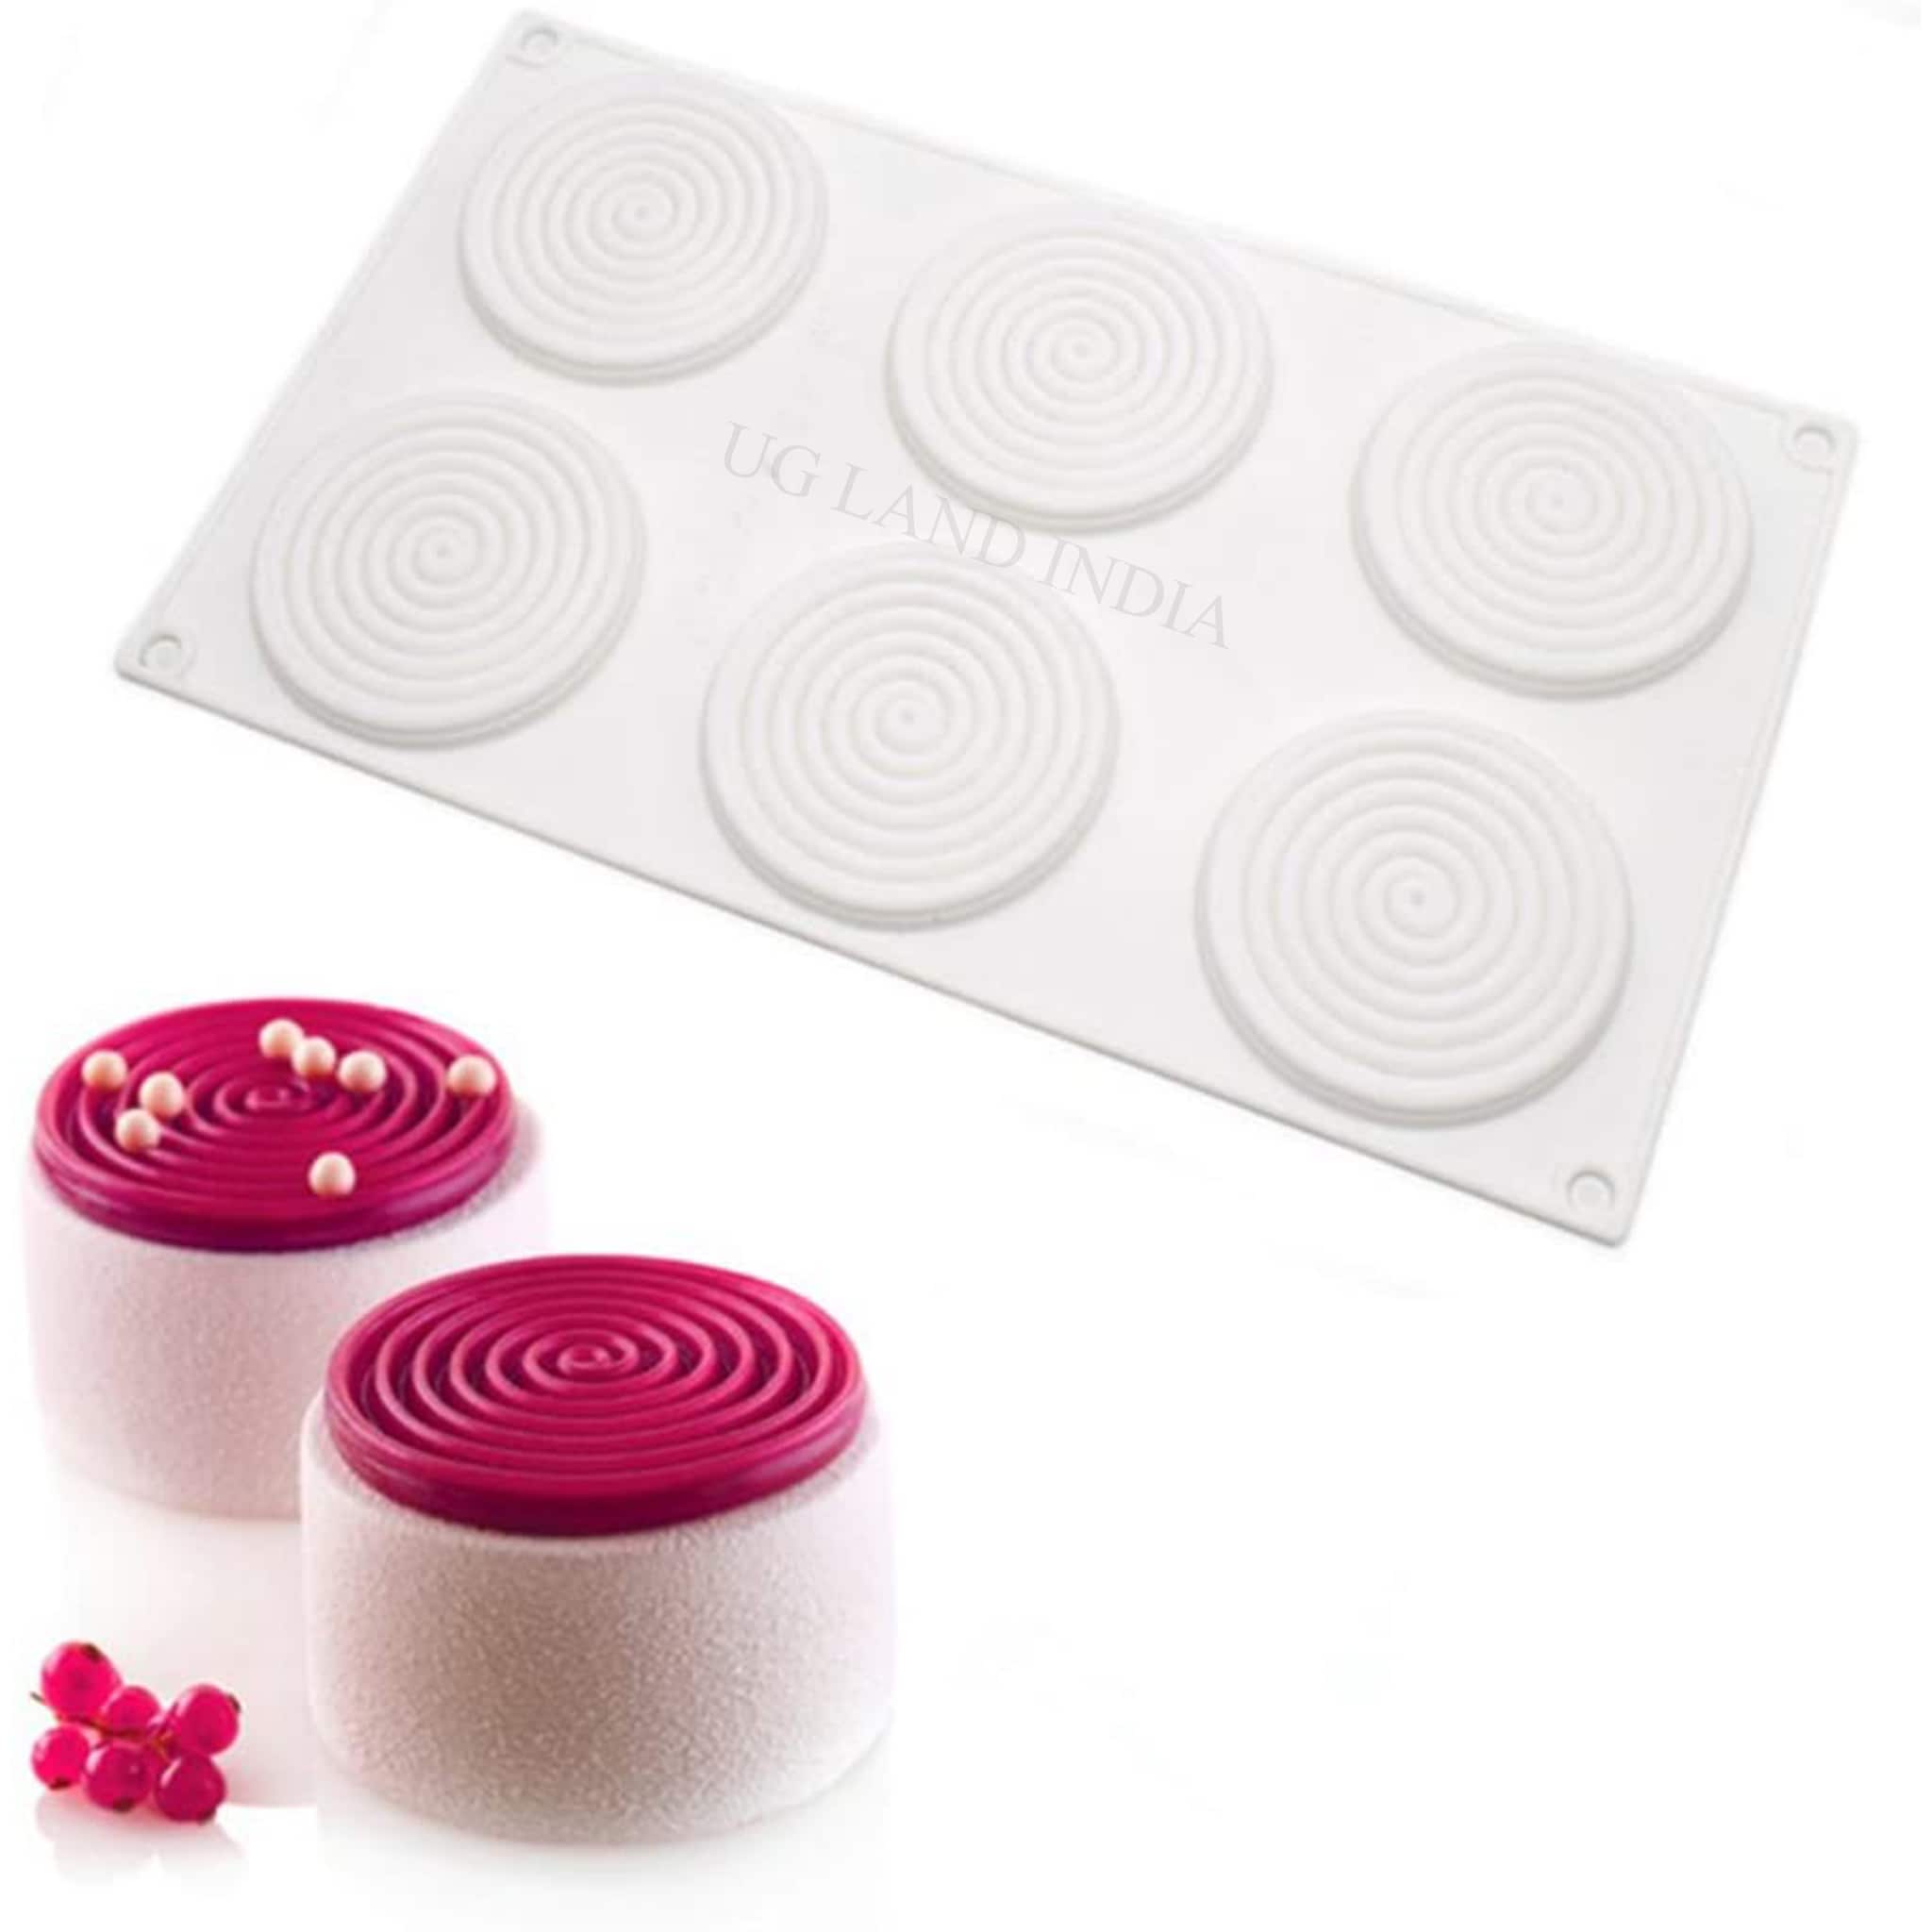 Silicone Molds for Baking: Is it Safe?